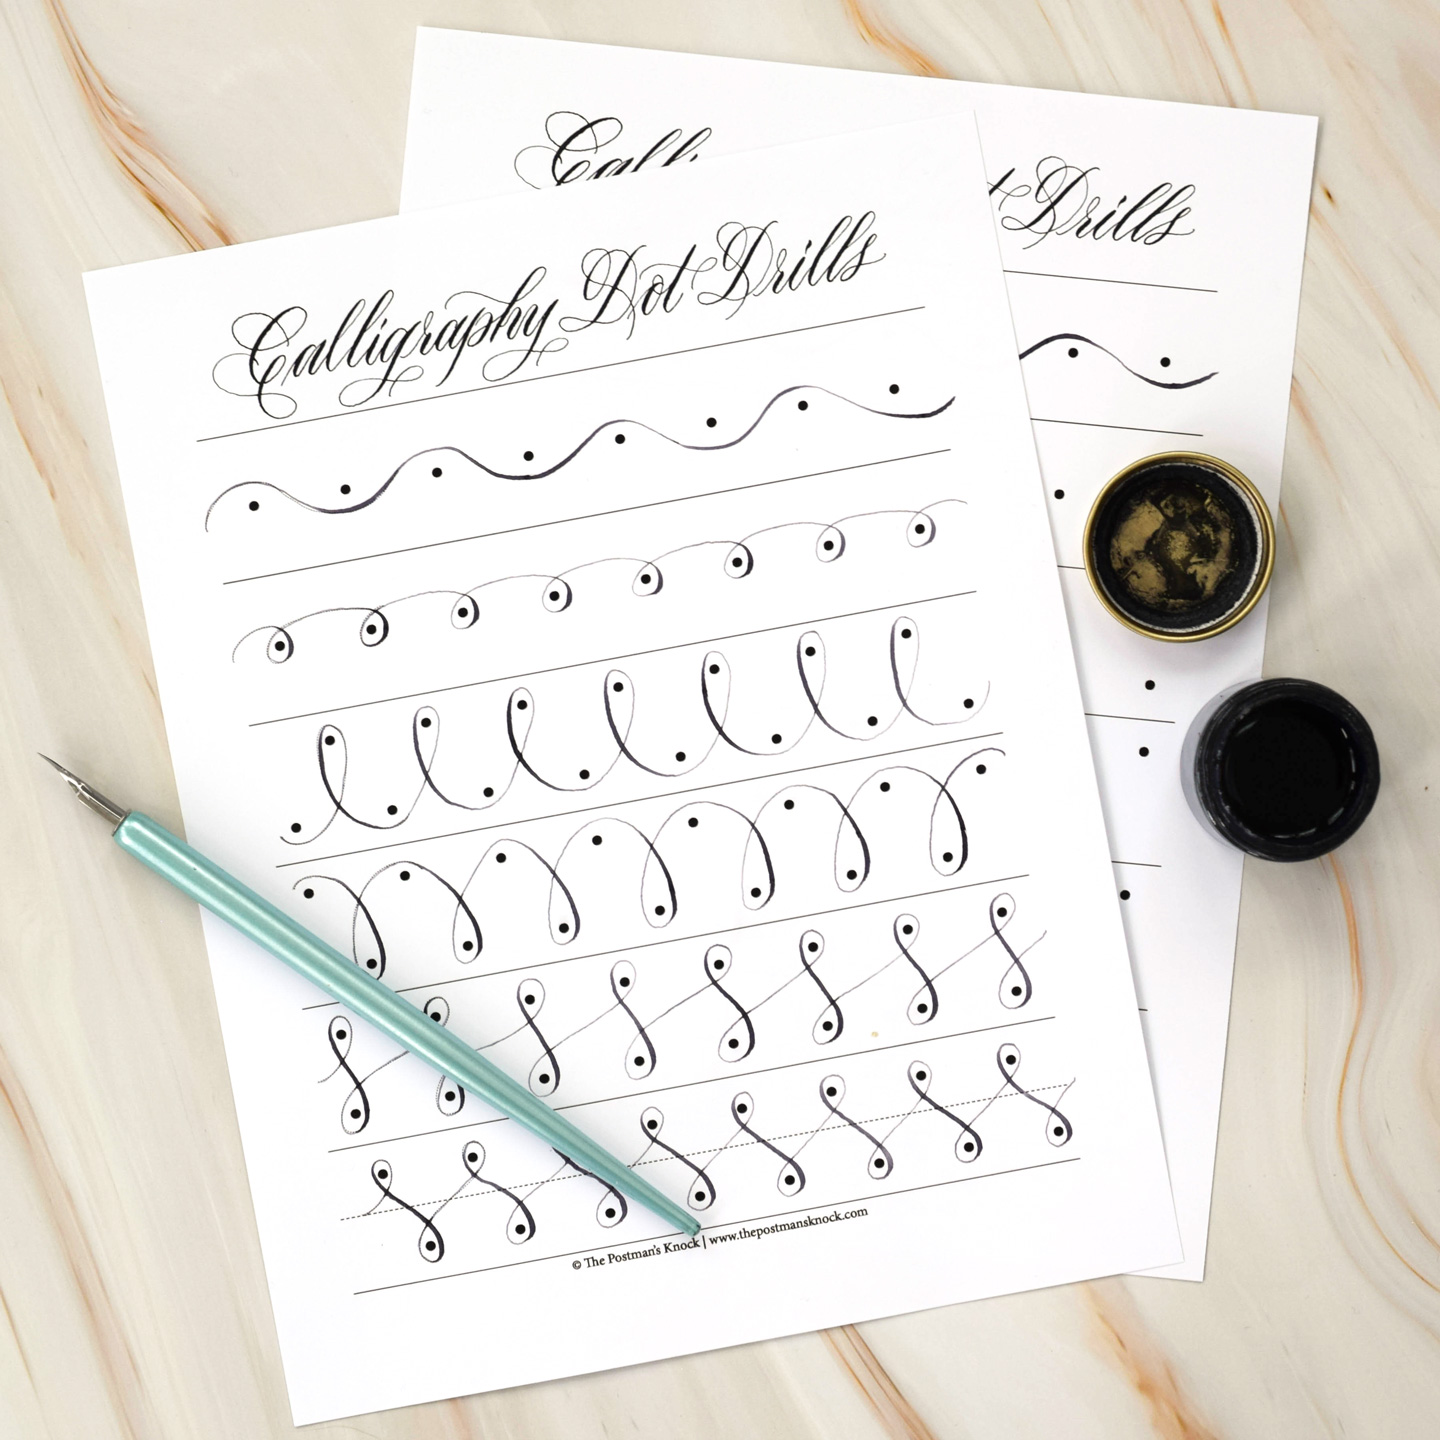 Calligraphy Drill. Calligraphy Paper. Printable Calligraphy Guide